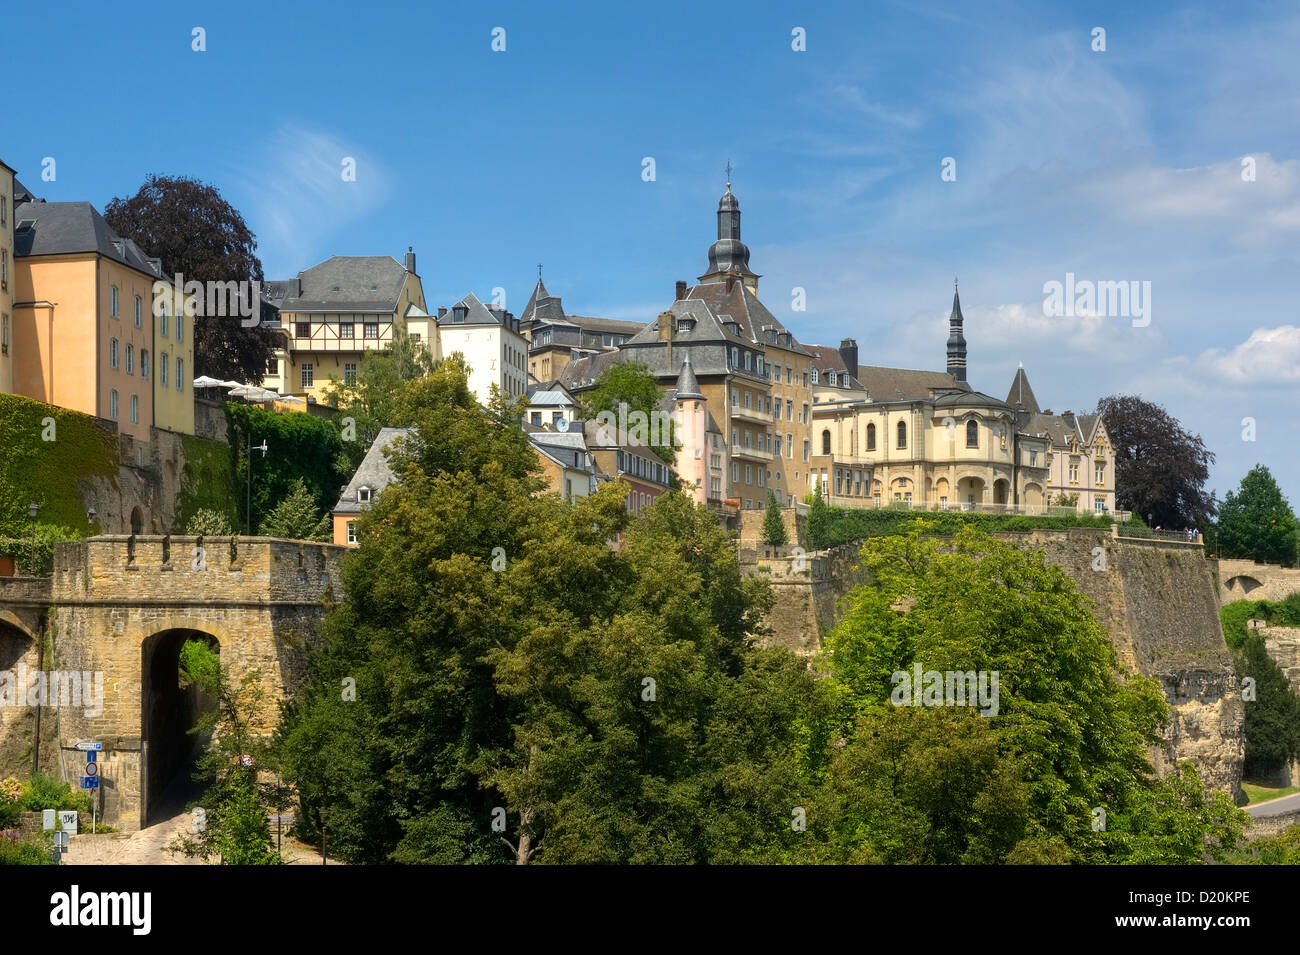 The St. Michaelis church in the sunlight, Luxemburg, Luxembourg, Europe Stock Photo